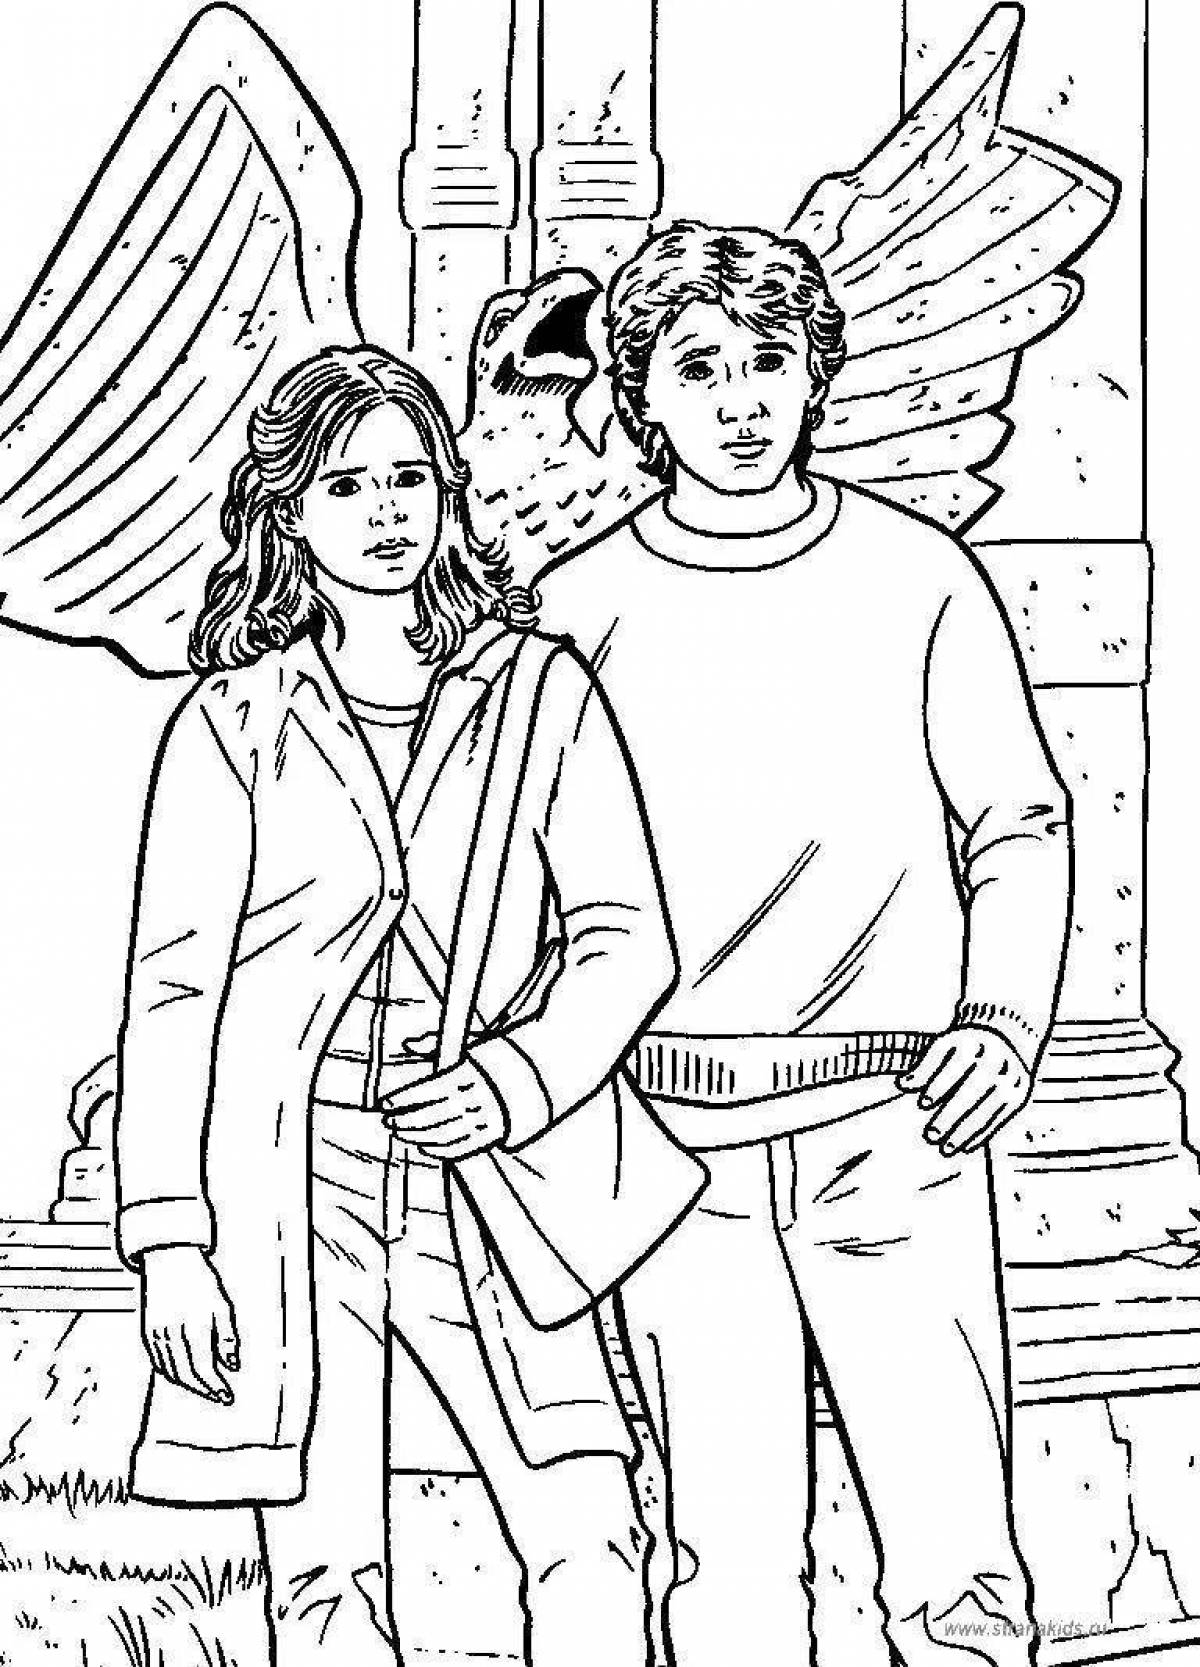 Ginny Weasley coloring page